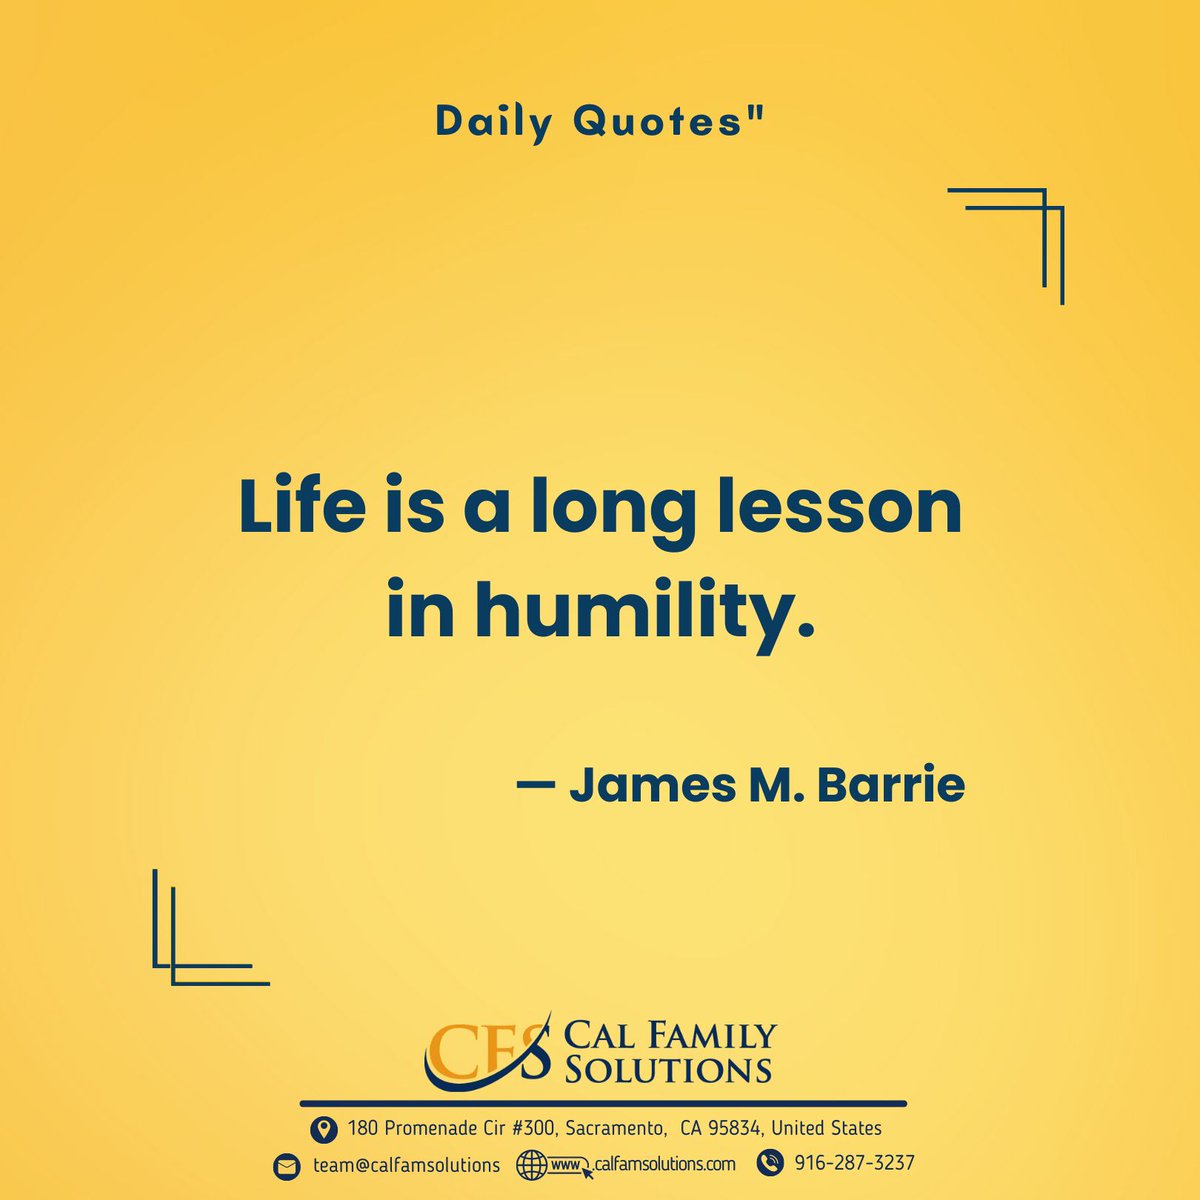 'Life is a long lesson in humility.' — James M. Barrie 🙏😇💗
#SelfReflection #StayHumble #Wisdom #KeepLearning #divorcesupport #divorcerecovery #divorcecoach #relationship #woman #Dailyquote #instaquote #momlife #DivorceLawyer #DivorceAttorney #DivorceSurvivor #LifeAfterDivorce